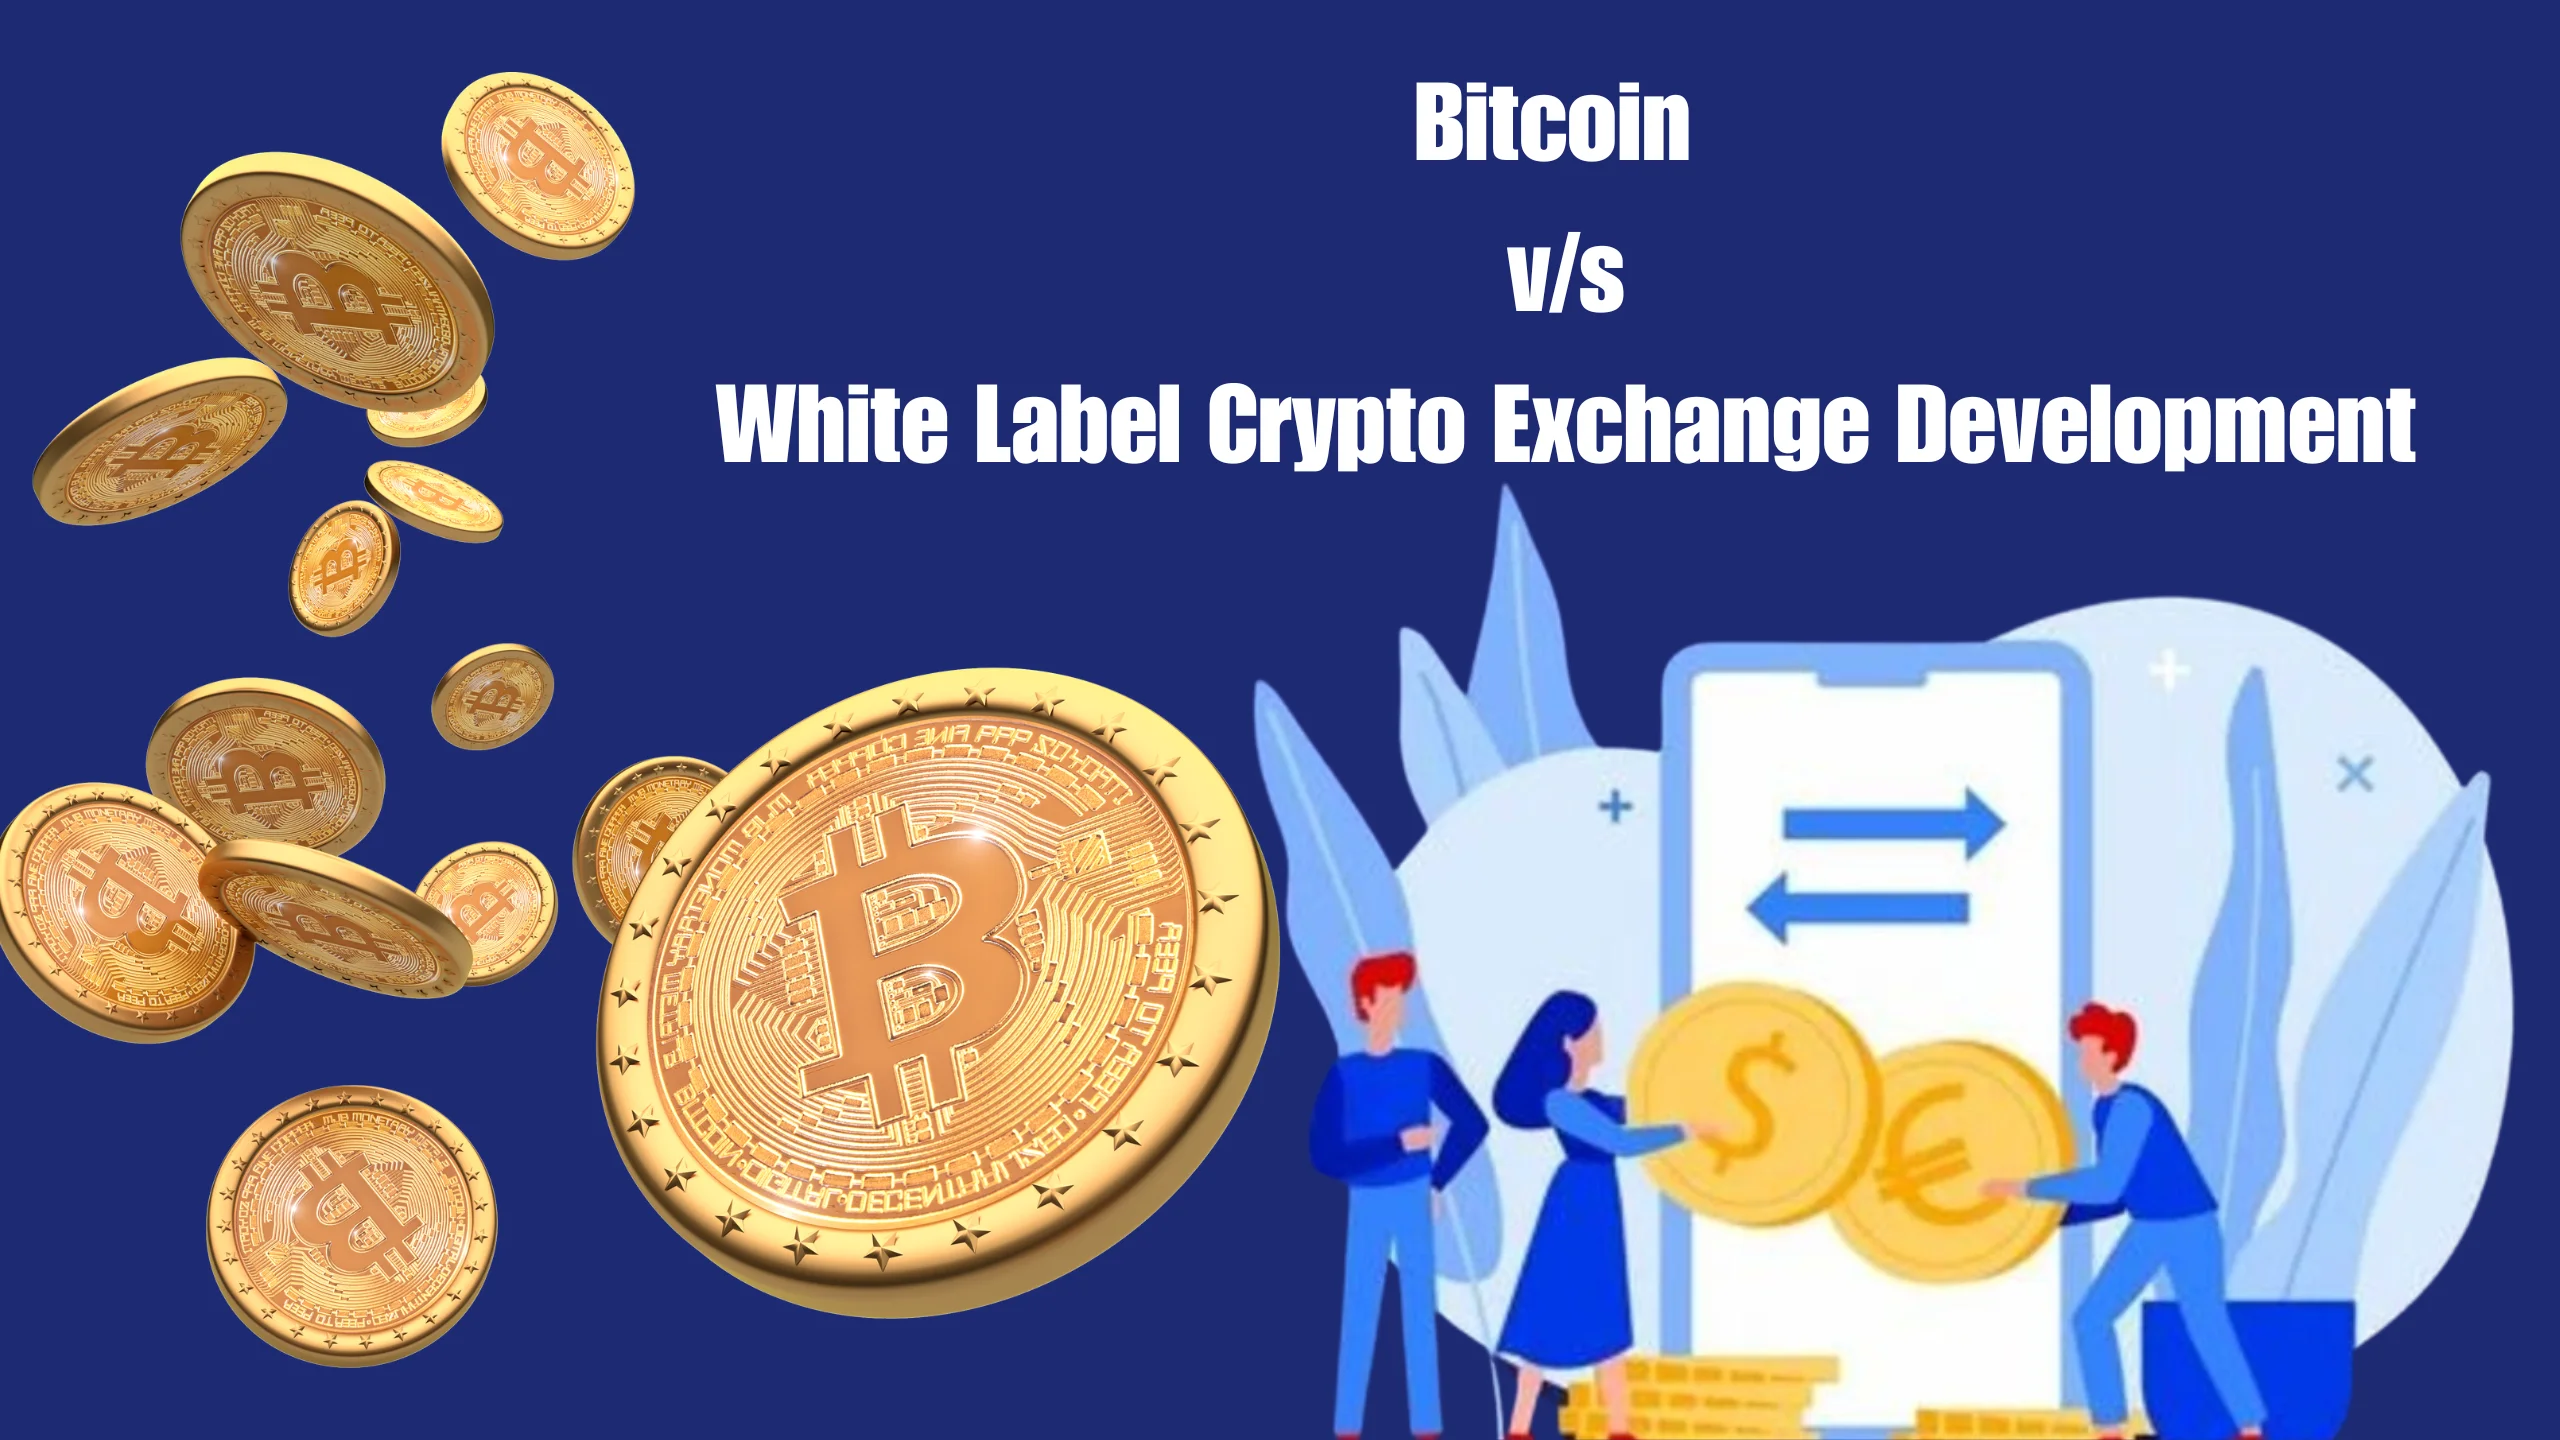 Comparing the evolution of Bitcoin with the versatility of White Label Crypto Exchange Development.